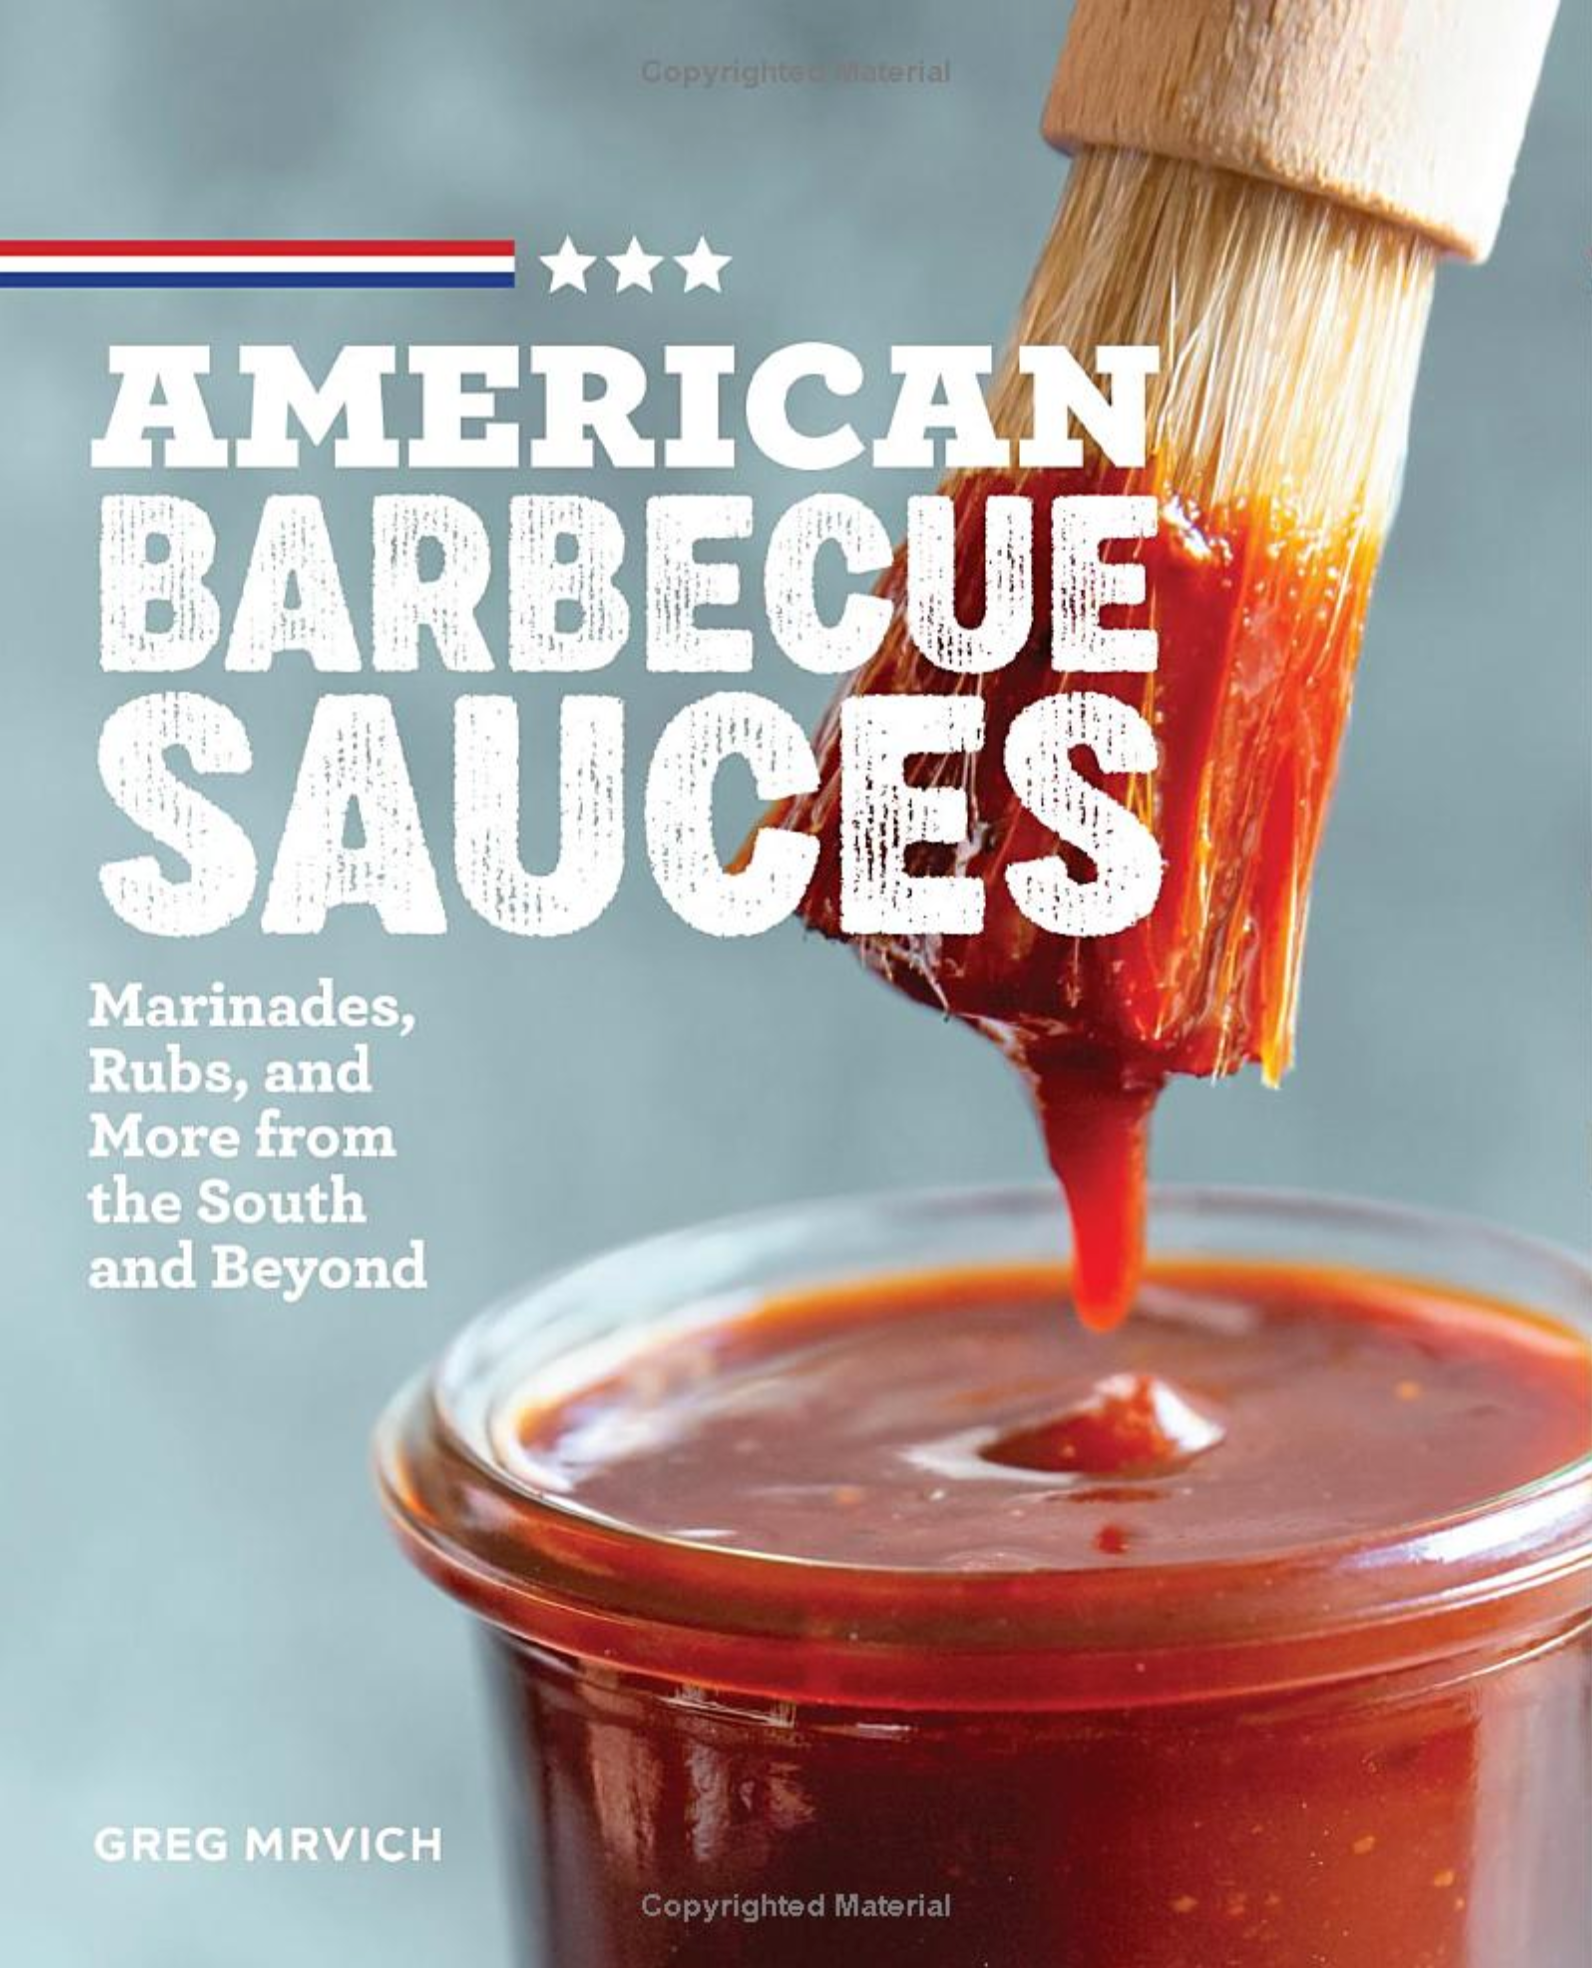 Artisan DIY BBQ Sauce Making Kit Learn how to make 3 home made barbecue  Sauces